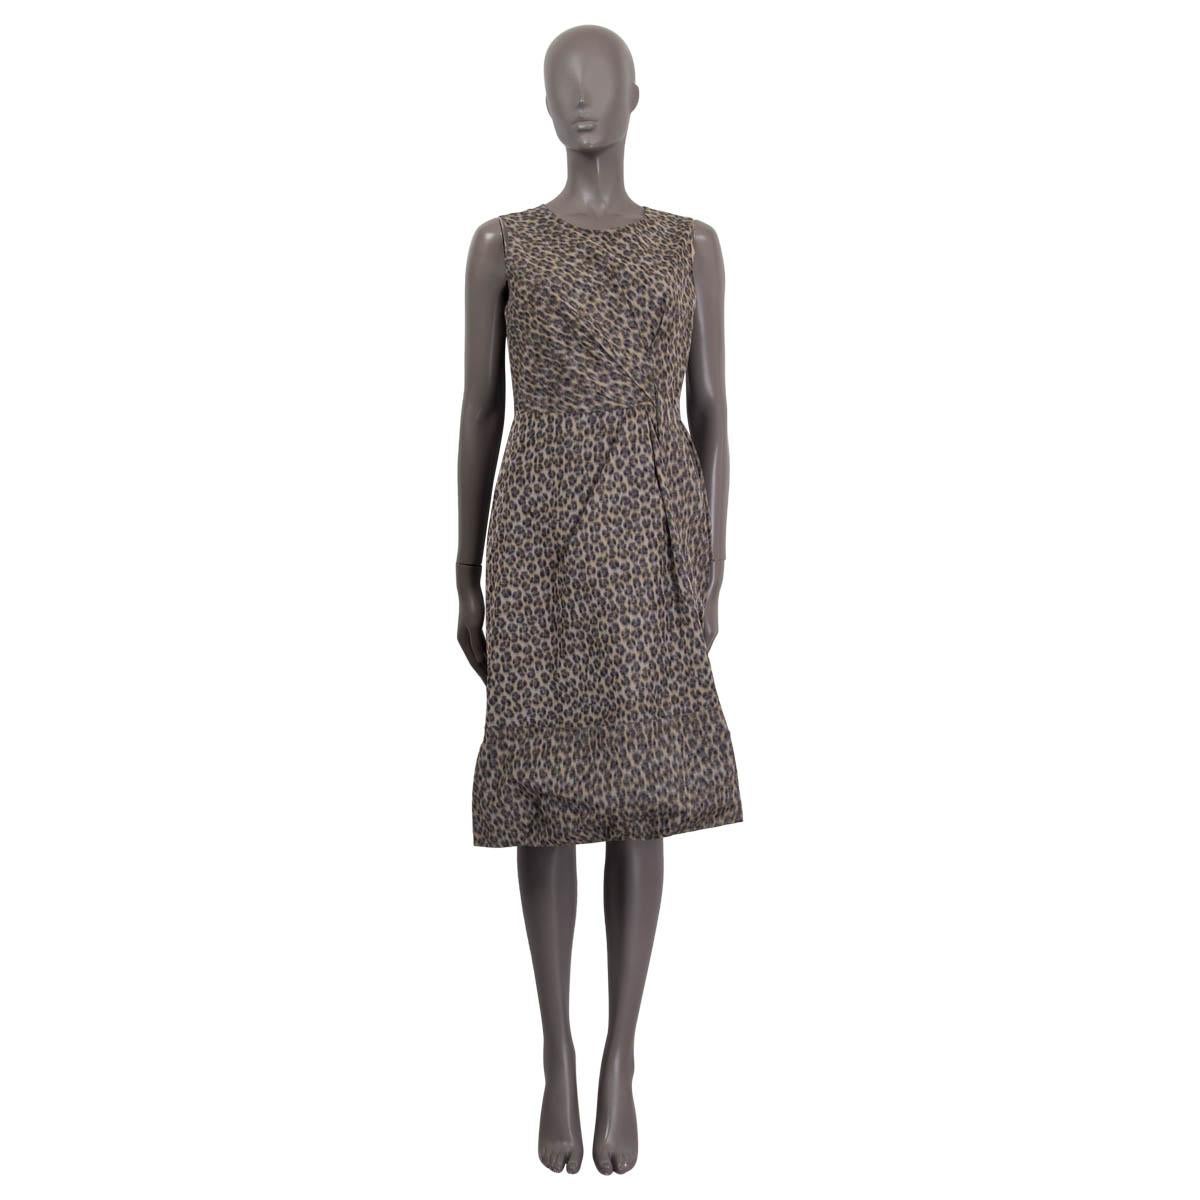 100% authentic Prada pleated sleeveless dress in gray and black polyester (62%) and silk (38%). Opens with a black band on the back and a concealed zipper and a hook on the side. Lined in beige silk and polyester (assumed cause tag is missing). Has